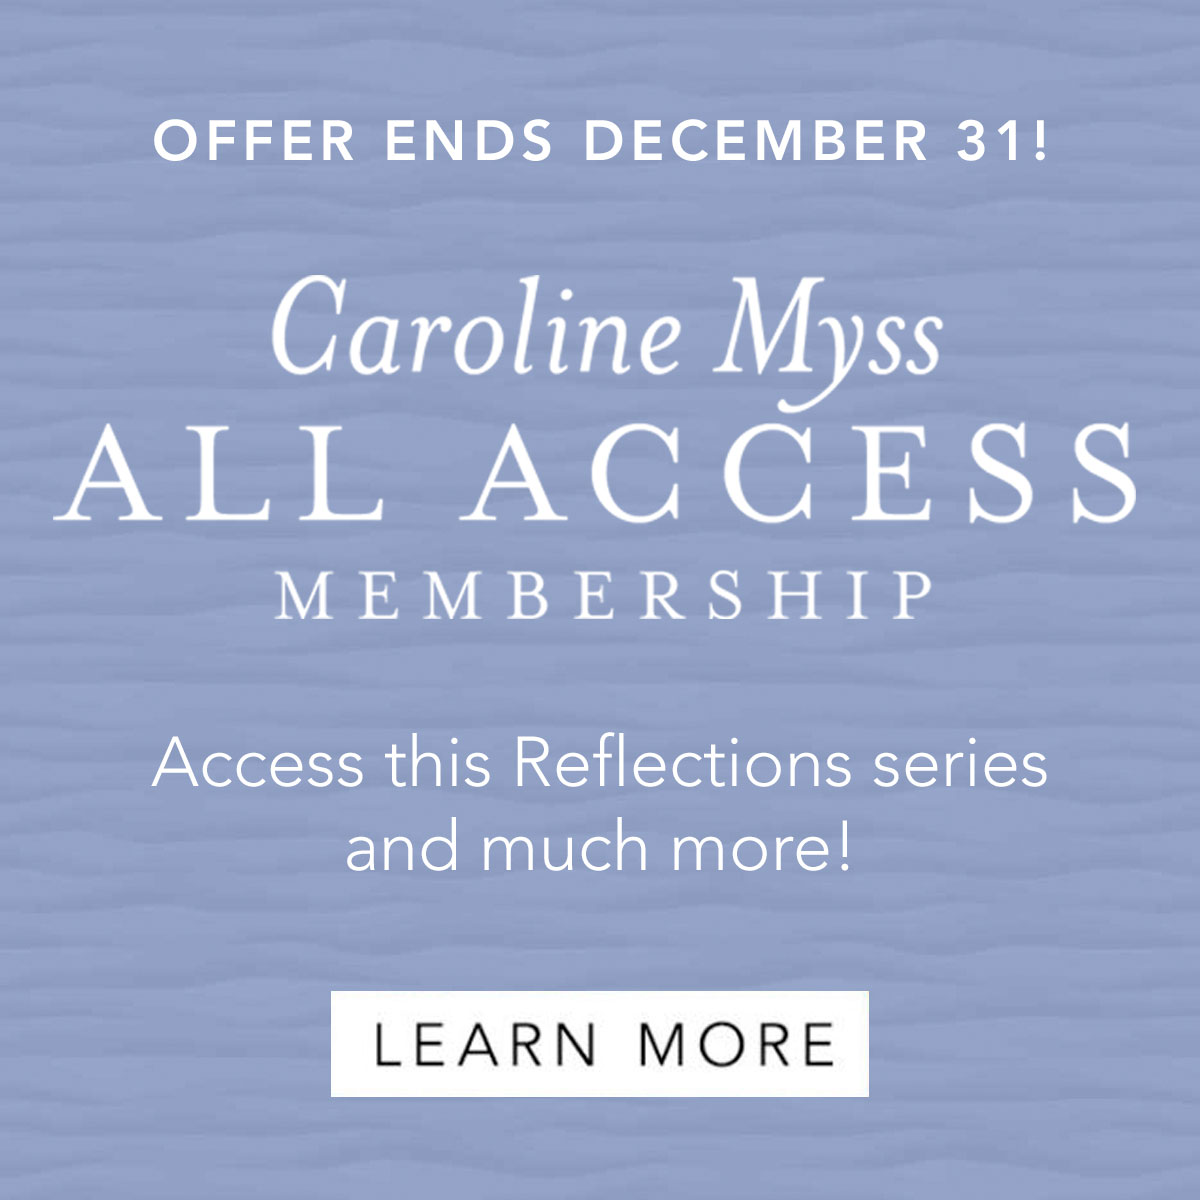 This Reflections series included with Caroline Myss All Access